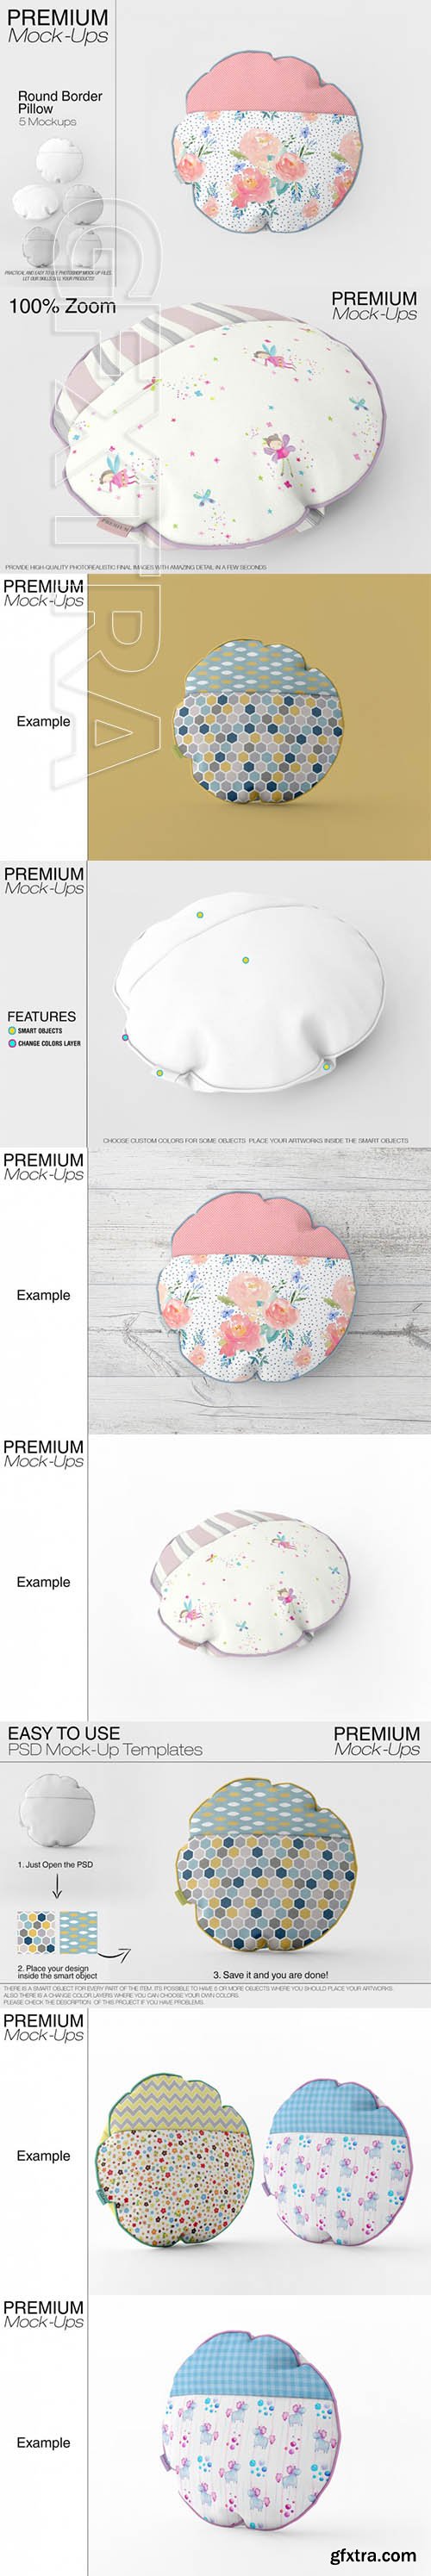 Round Borderd Pillow Mockup Pack